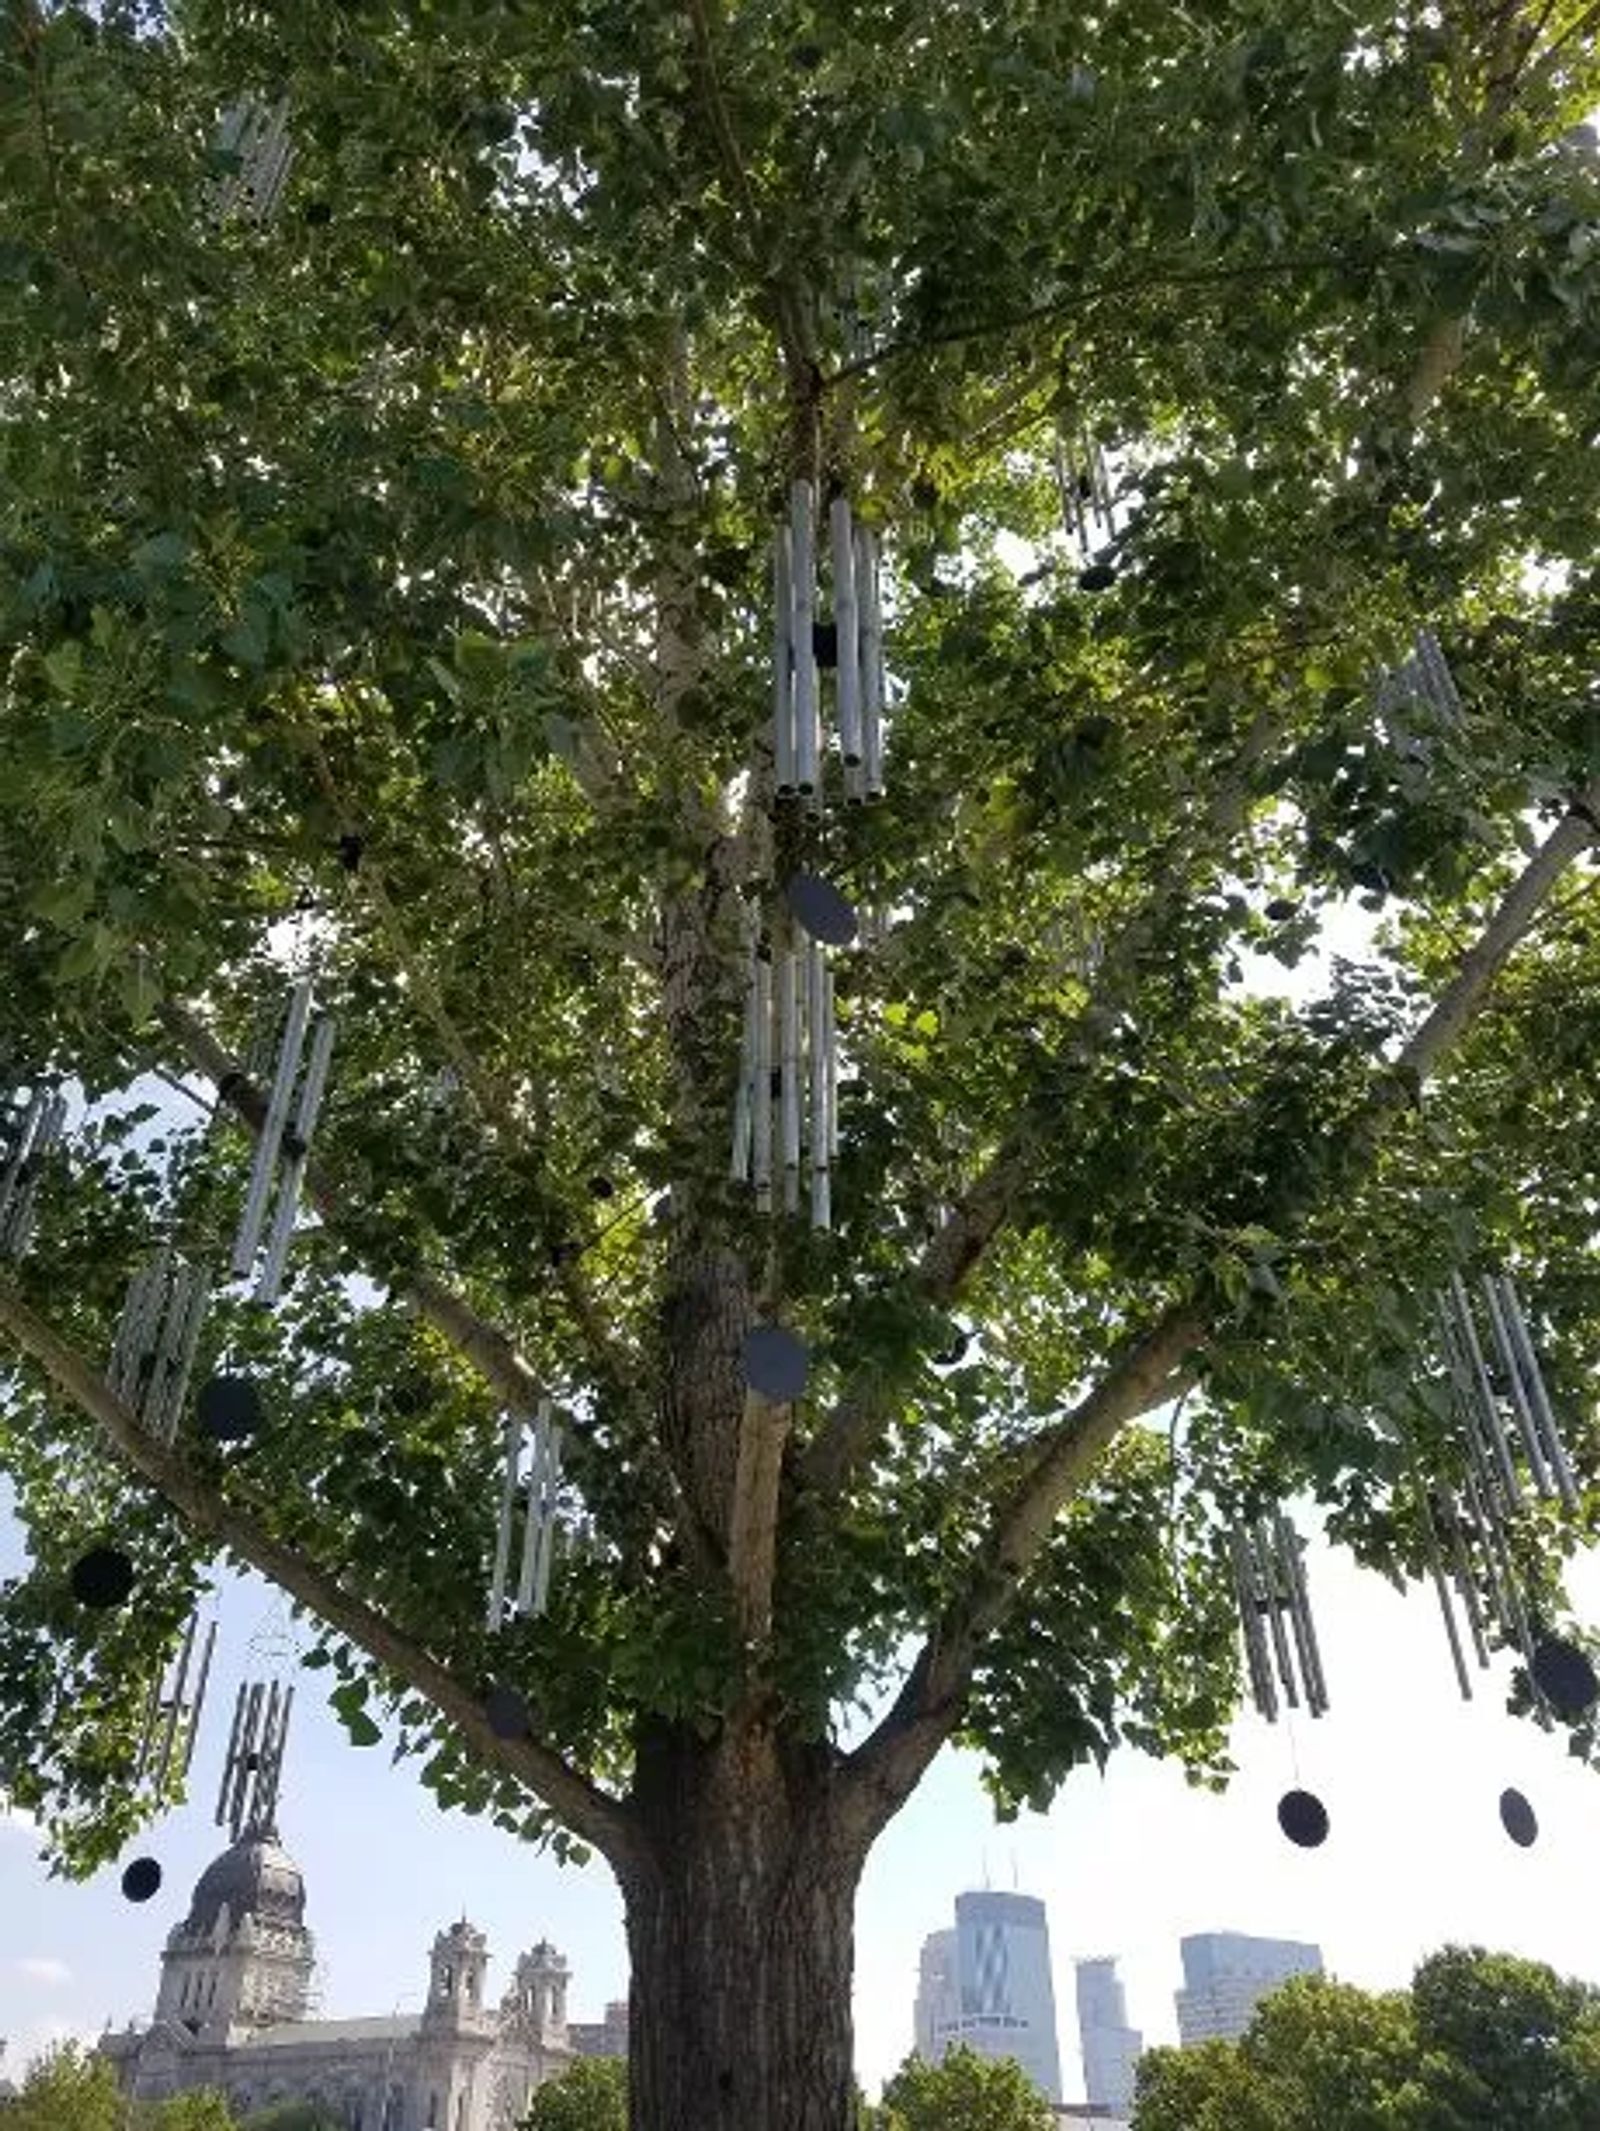 Photo of a wind chime sculpture in Minneapolis, Minnesota